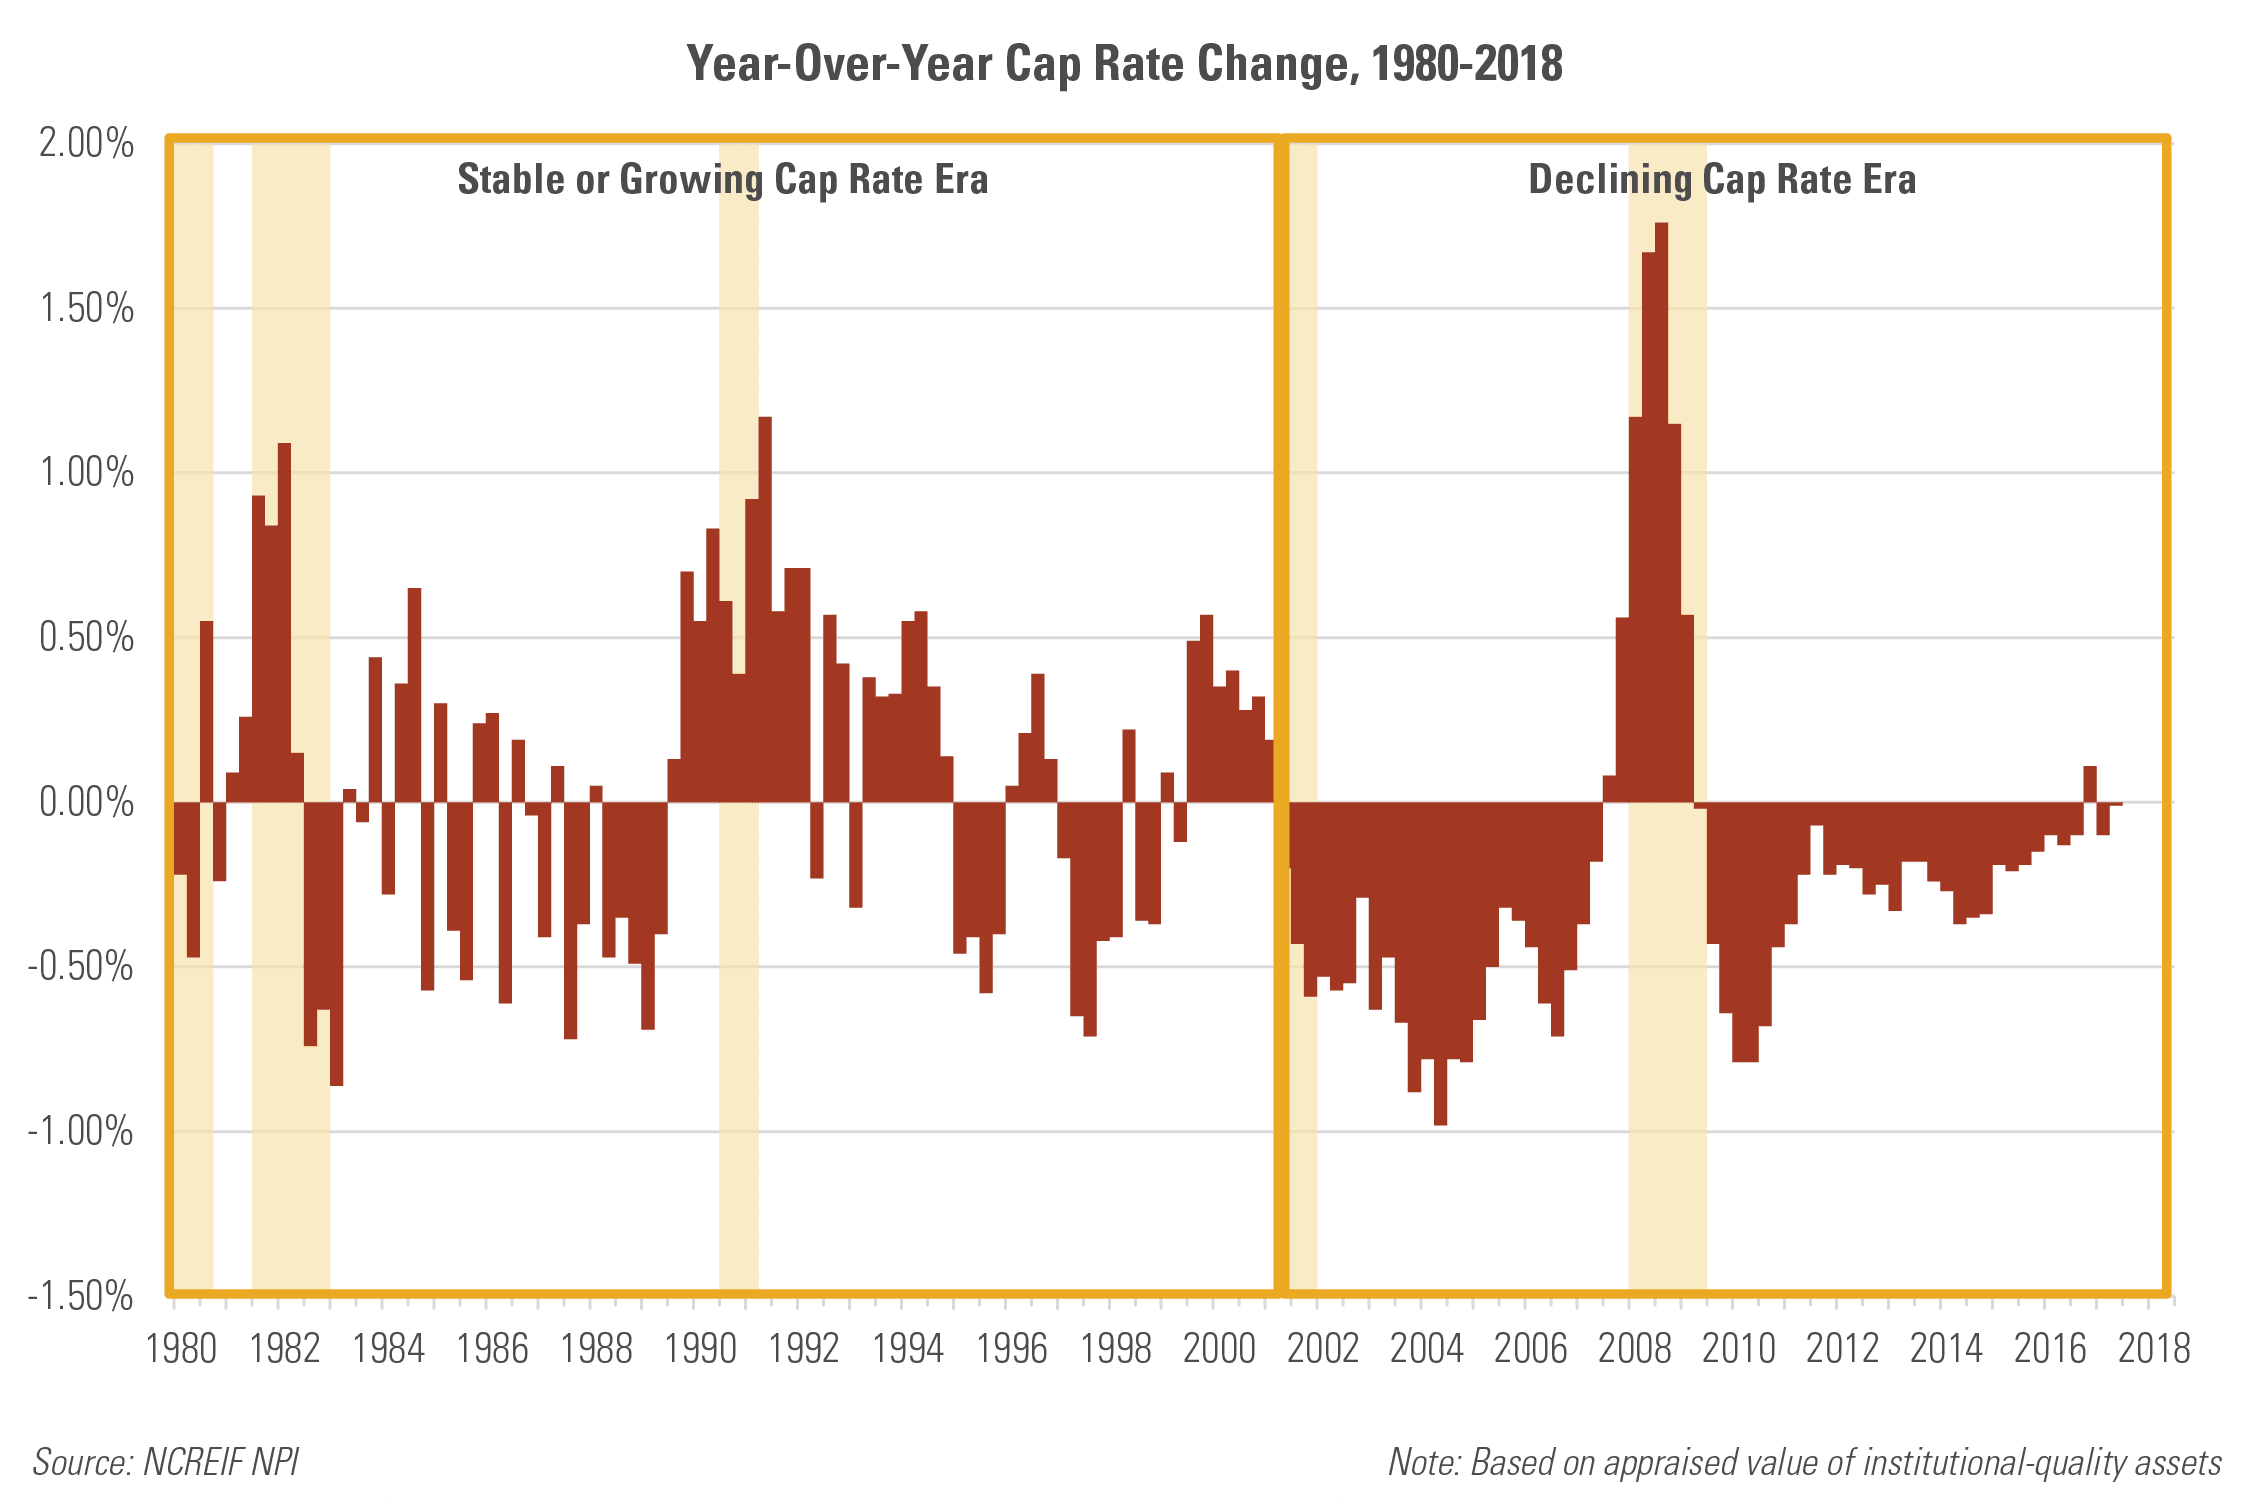 Year-over-year Cap Rate Change, 1980-2018